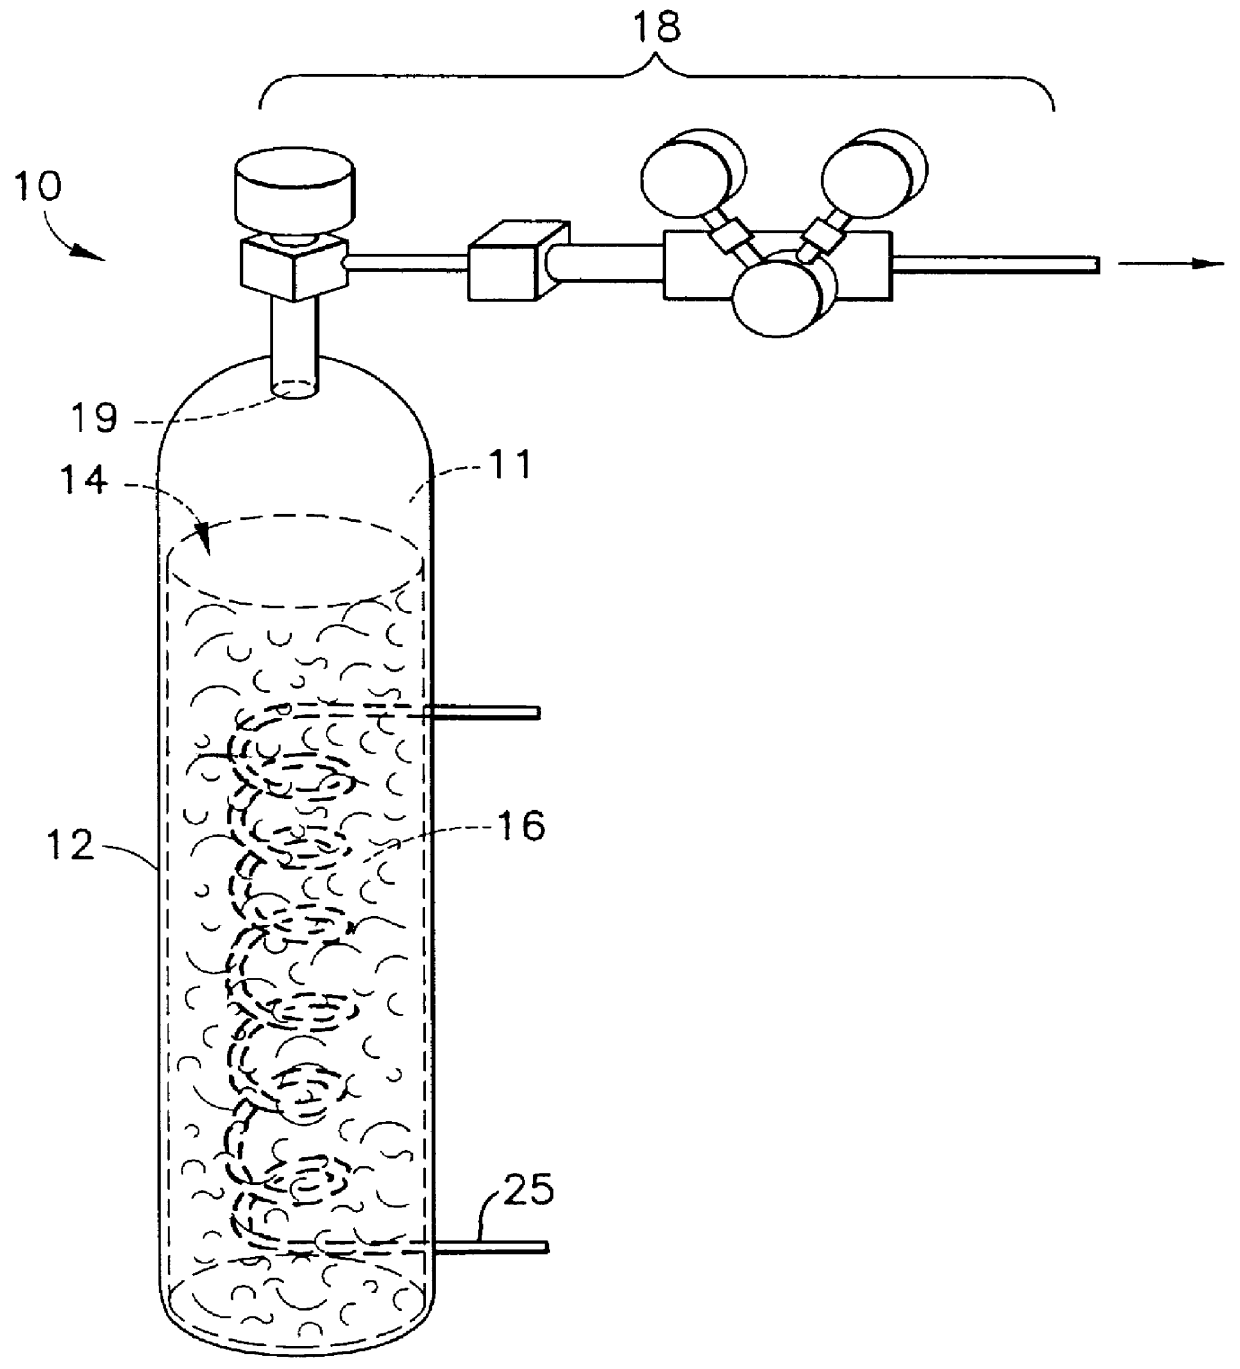 Low concentration gas delivery system utilizing sorbent-based gas storage and delivery system